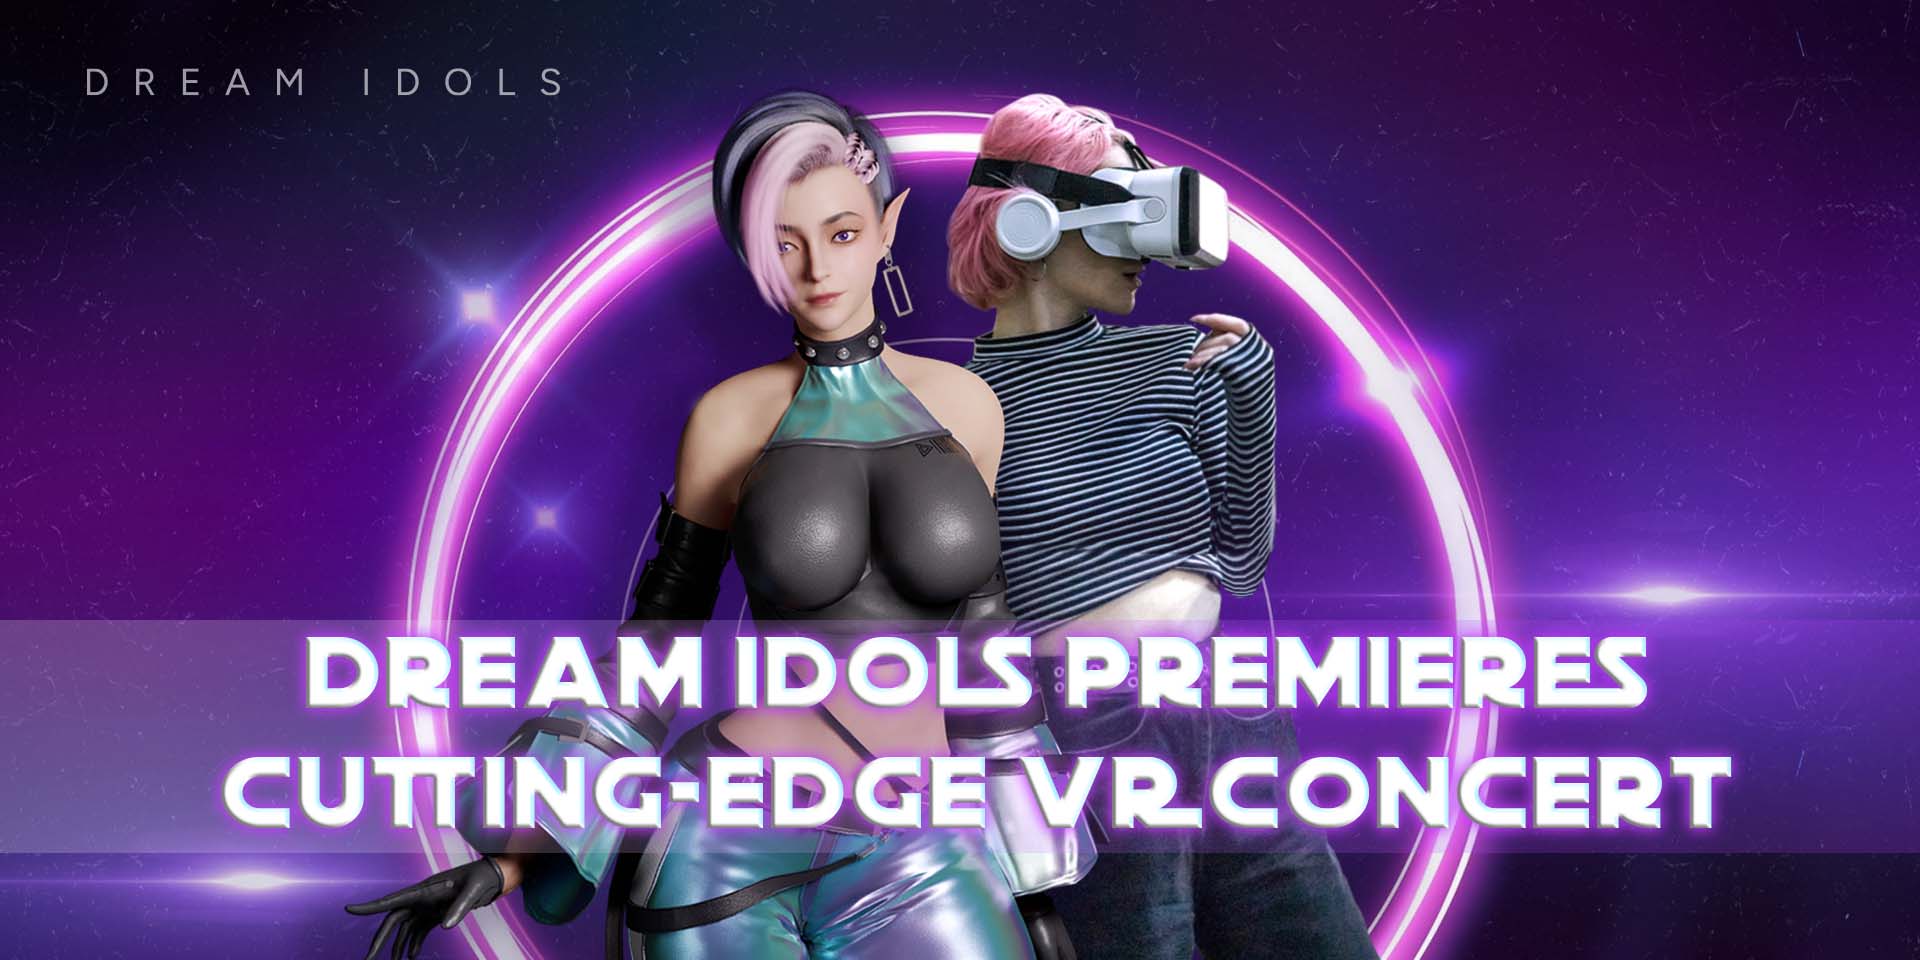 Andal, the first Dream Idol will be premiering her VR character model this Spring.